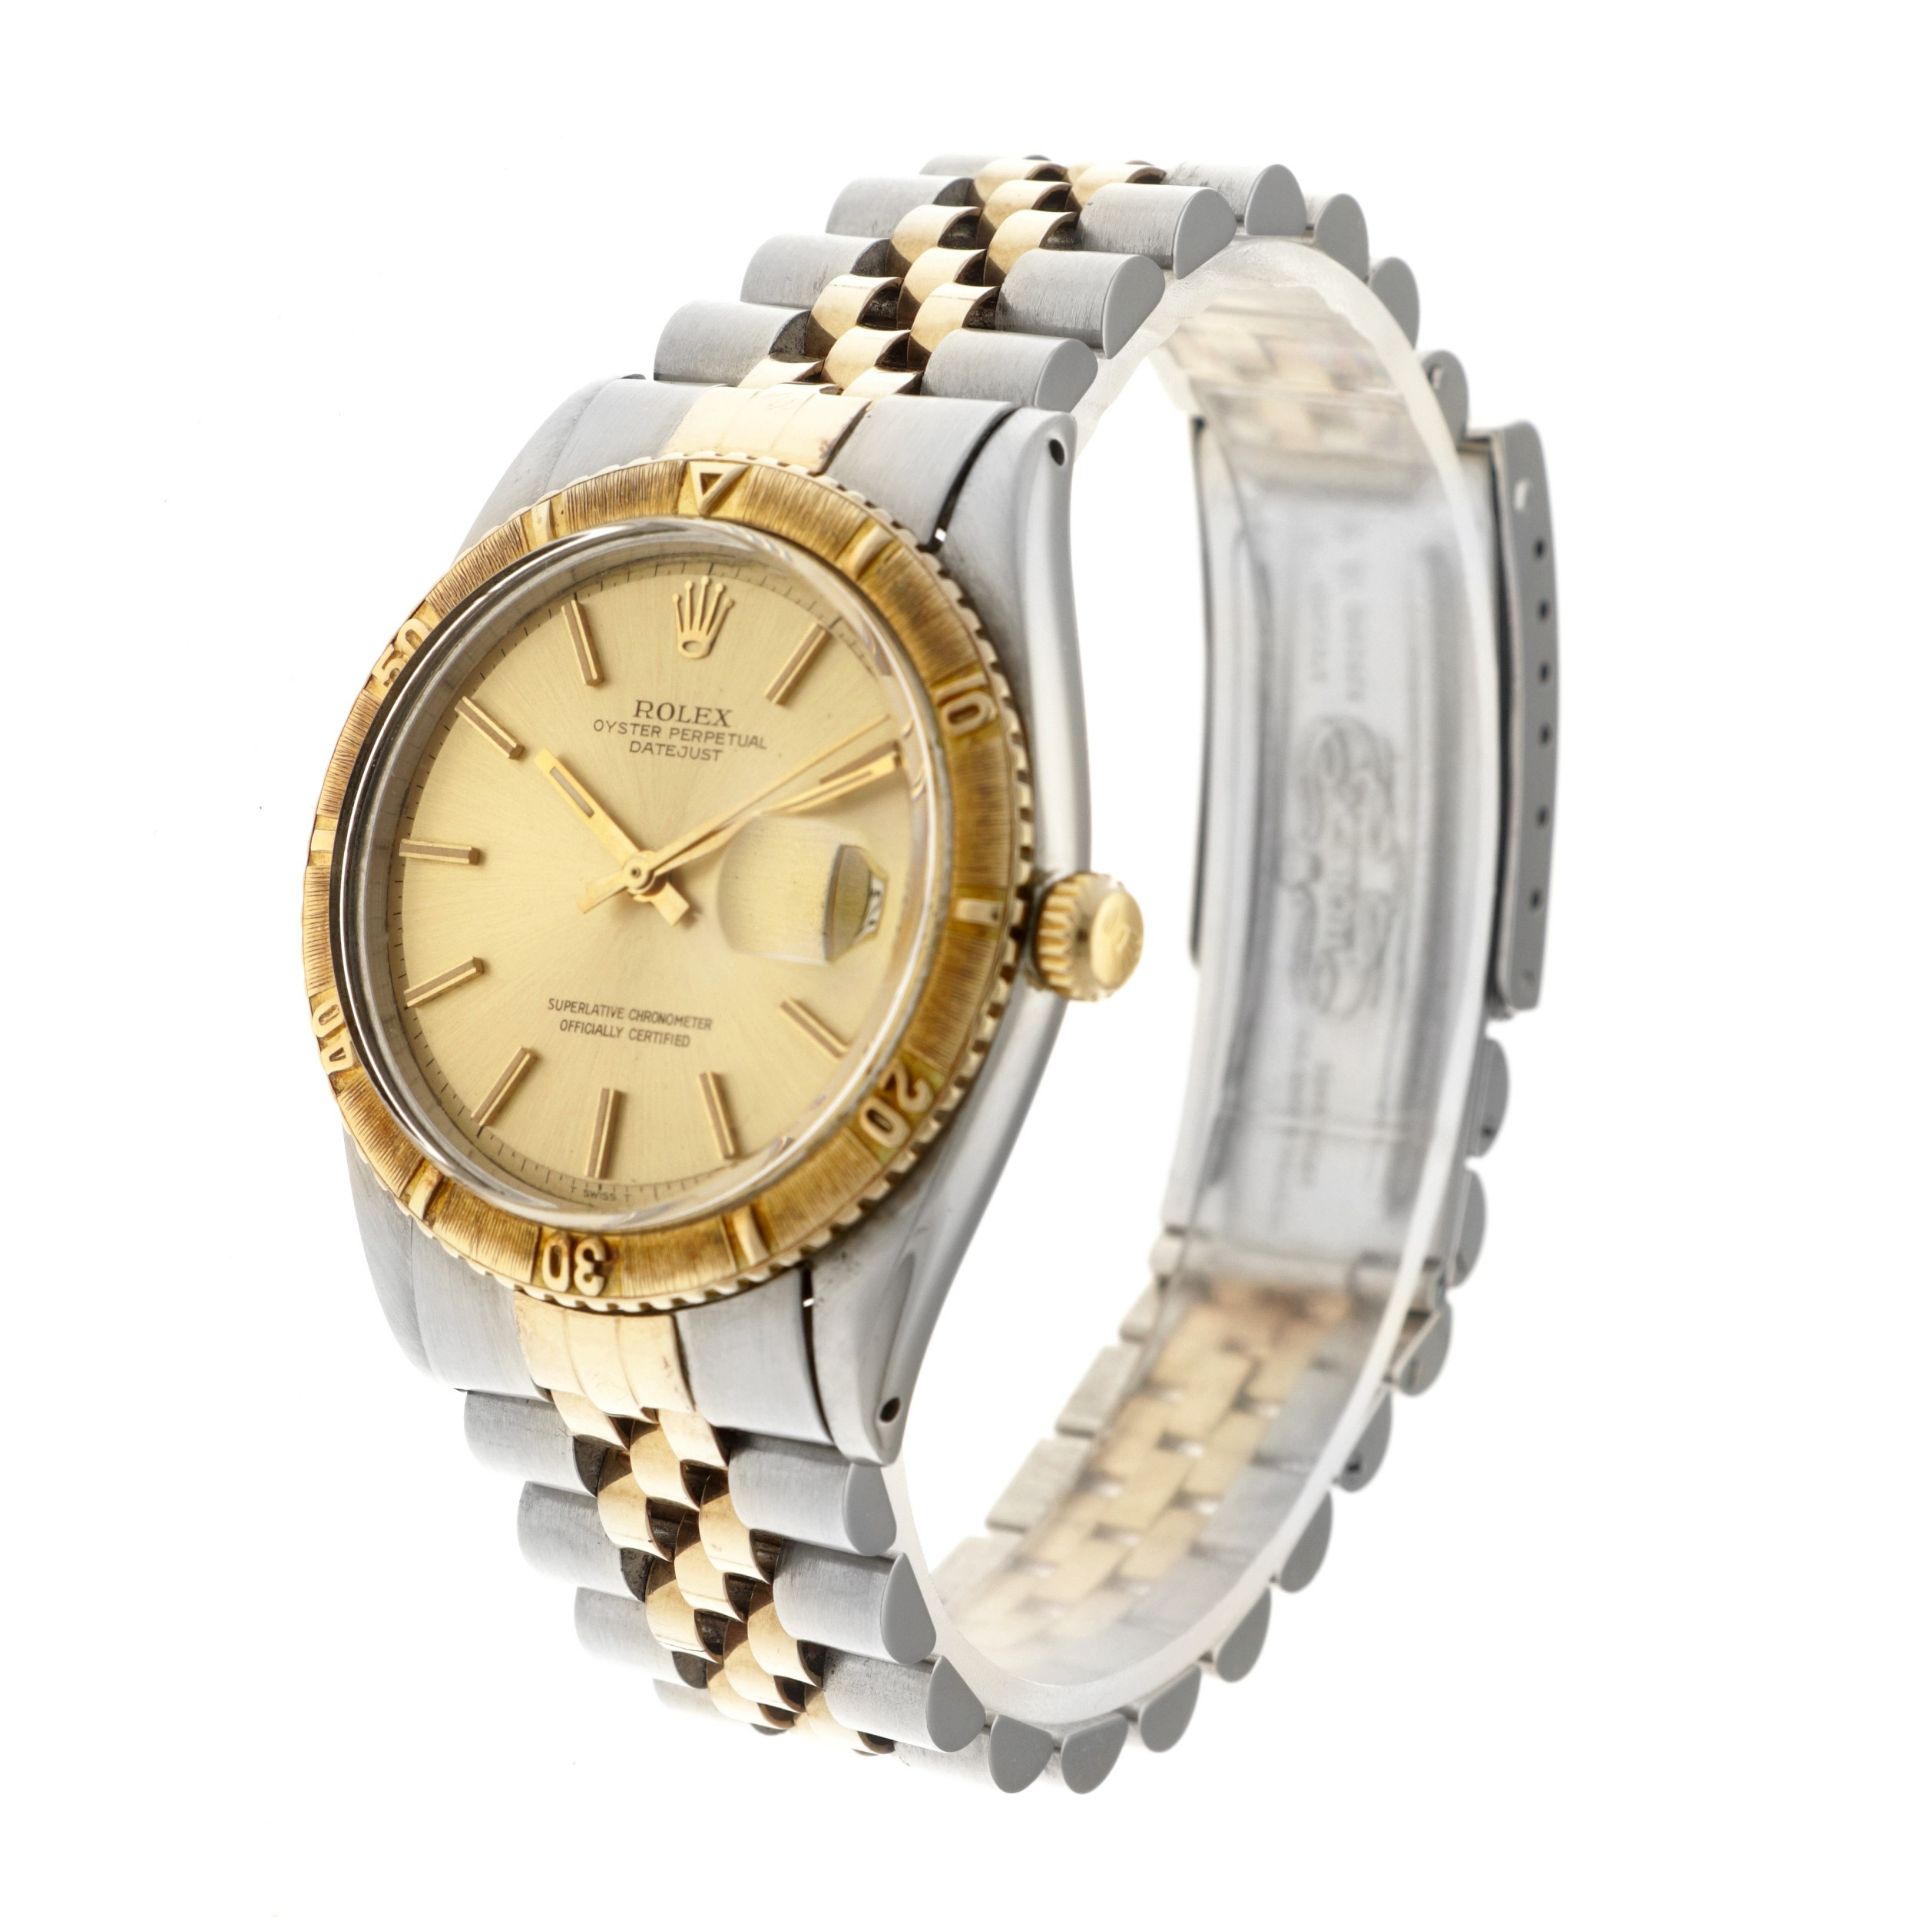 No Reserve - Rolex Datejust 36 Turn-O-Graph 1625 - Men's watch - ca. 1978. - Image 2 of 6